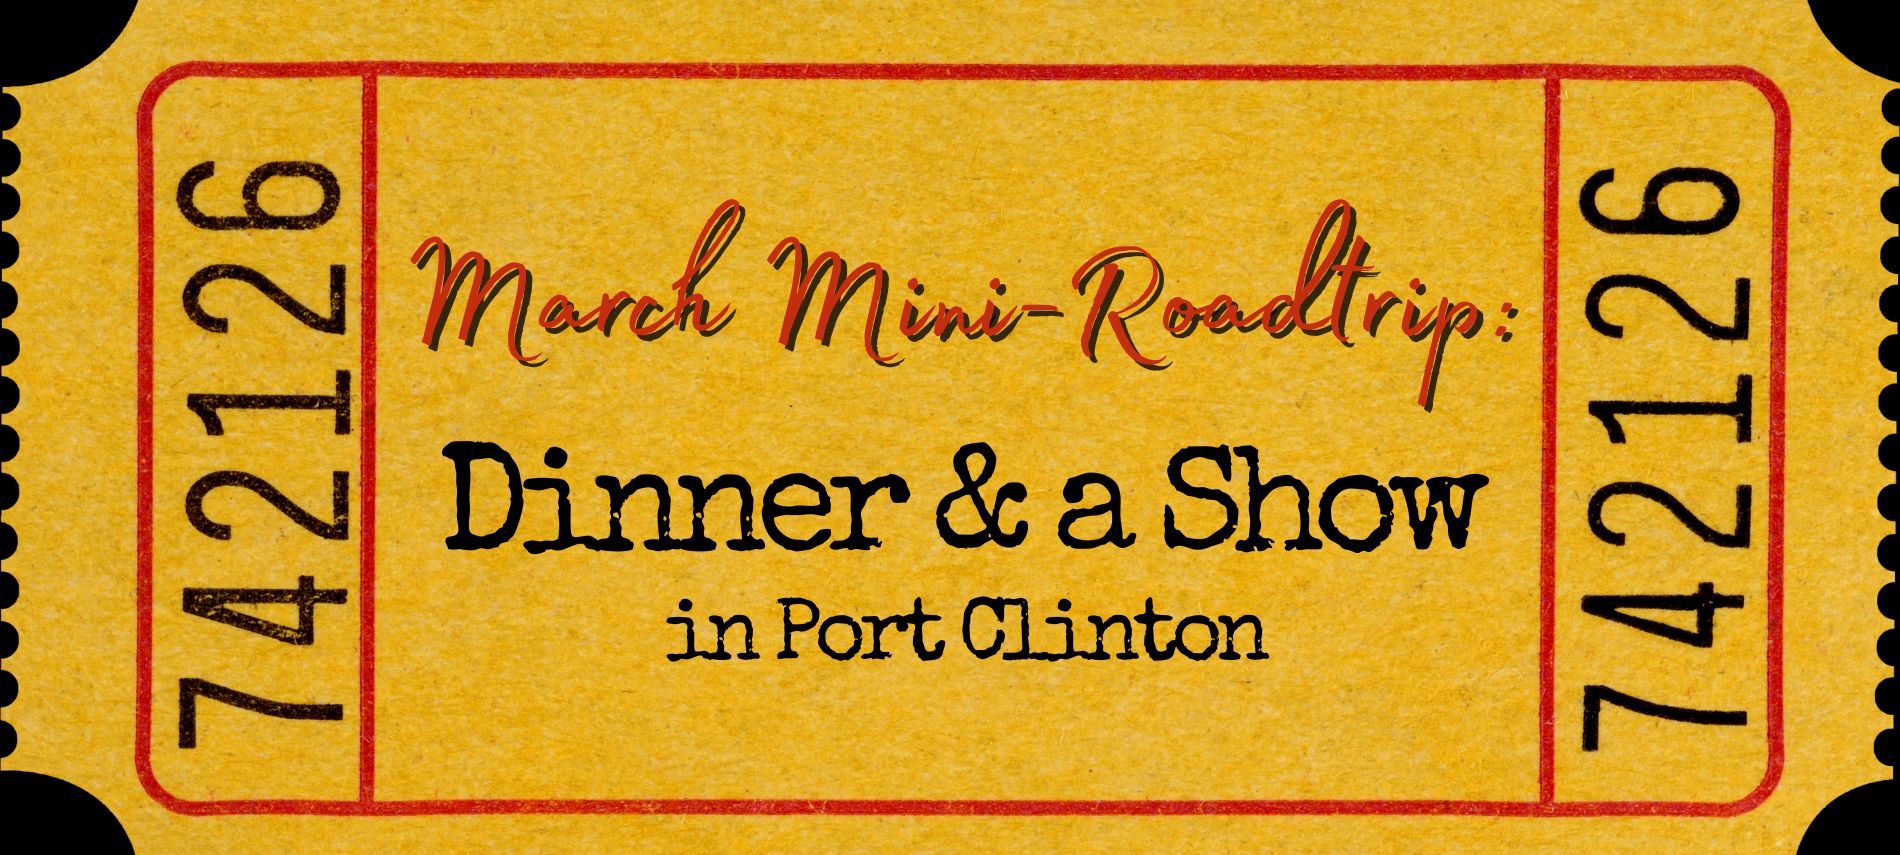 Movie ticket background with black and red text: March Mini-Roadtrip: Dinner & a Show in Port Clinton